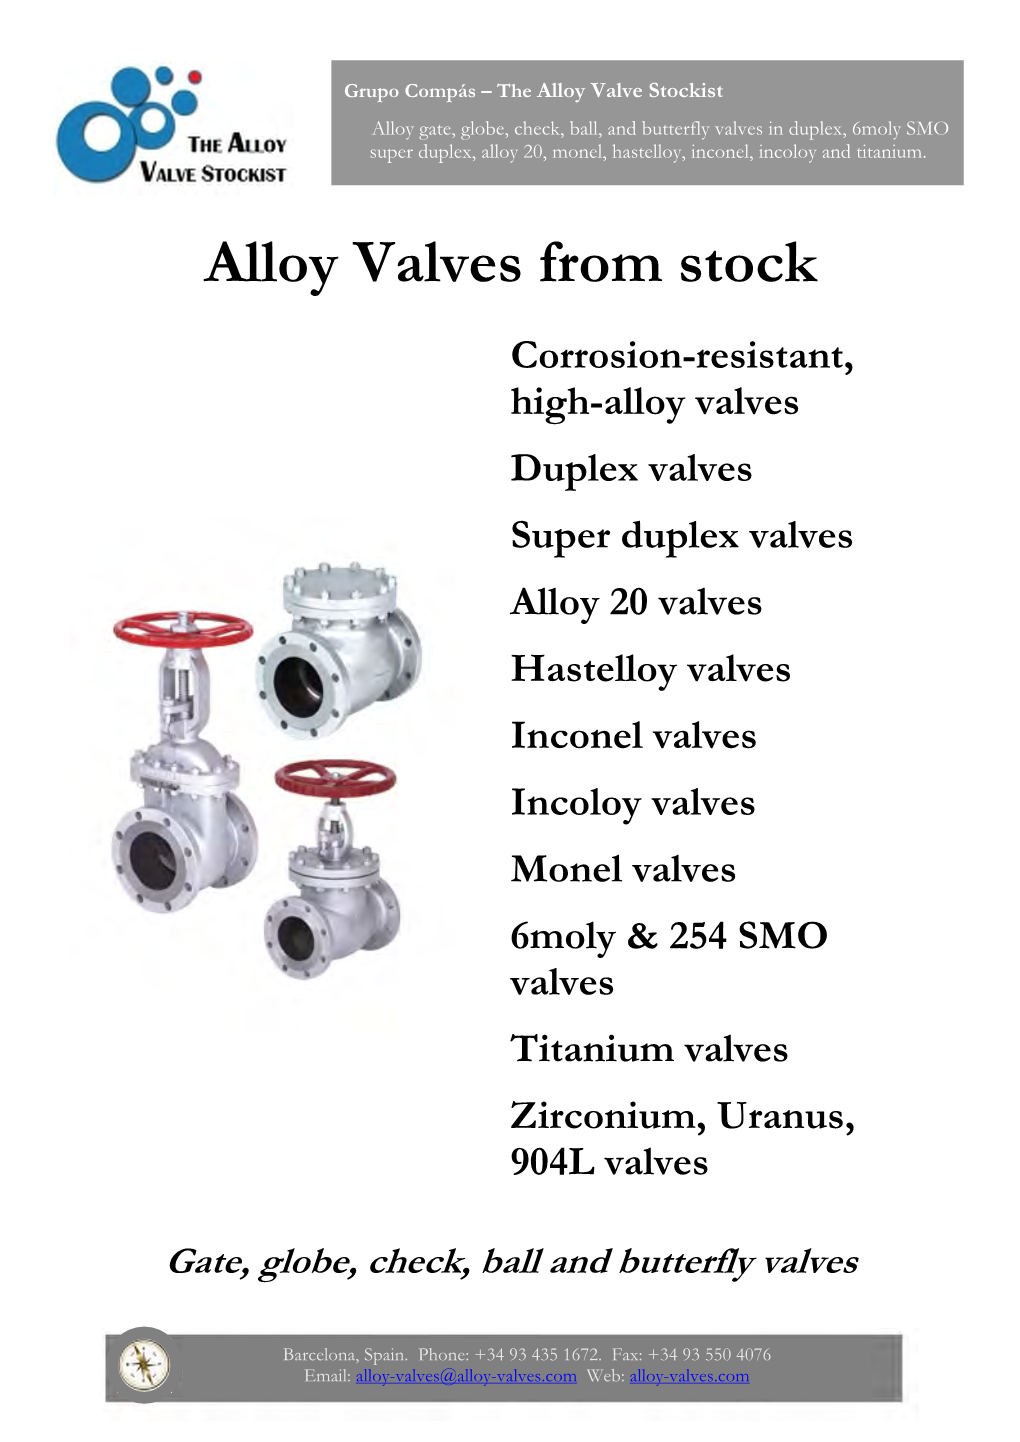 Alloy Valves from Stock